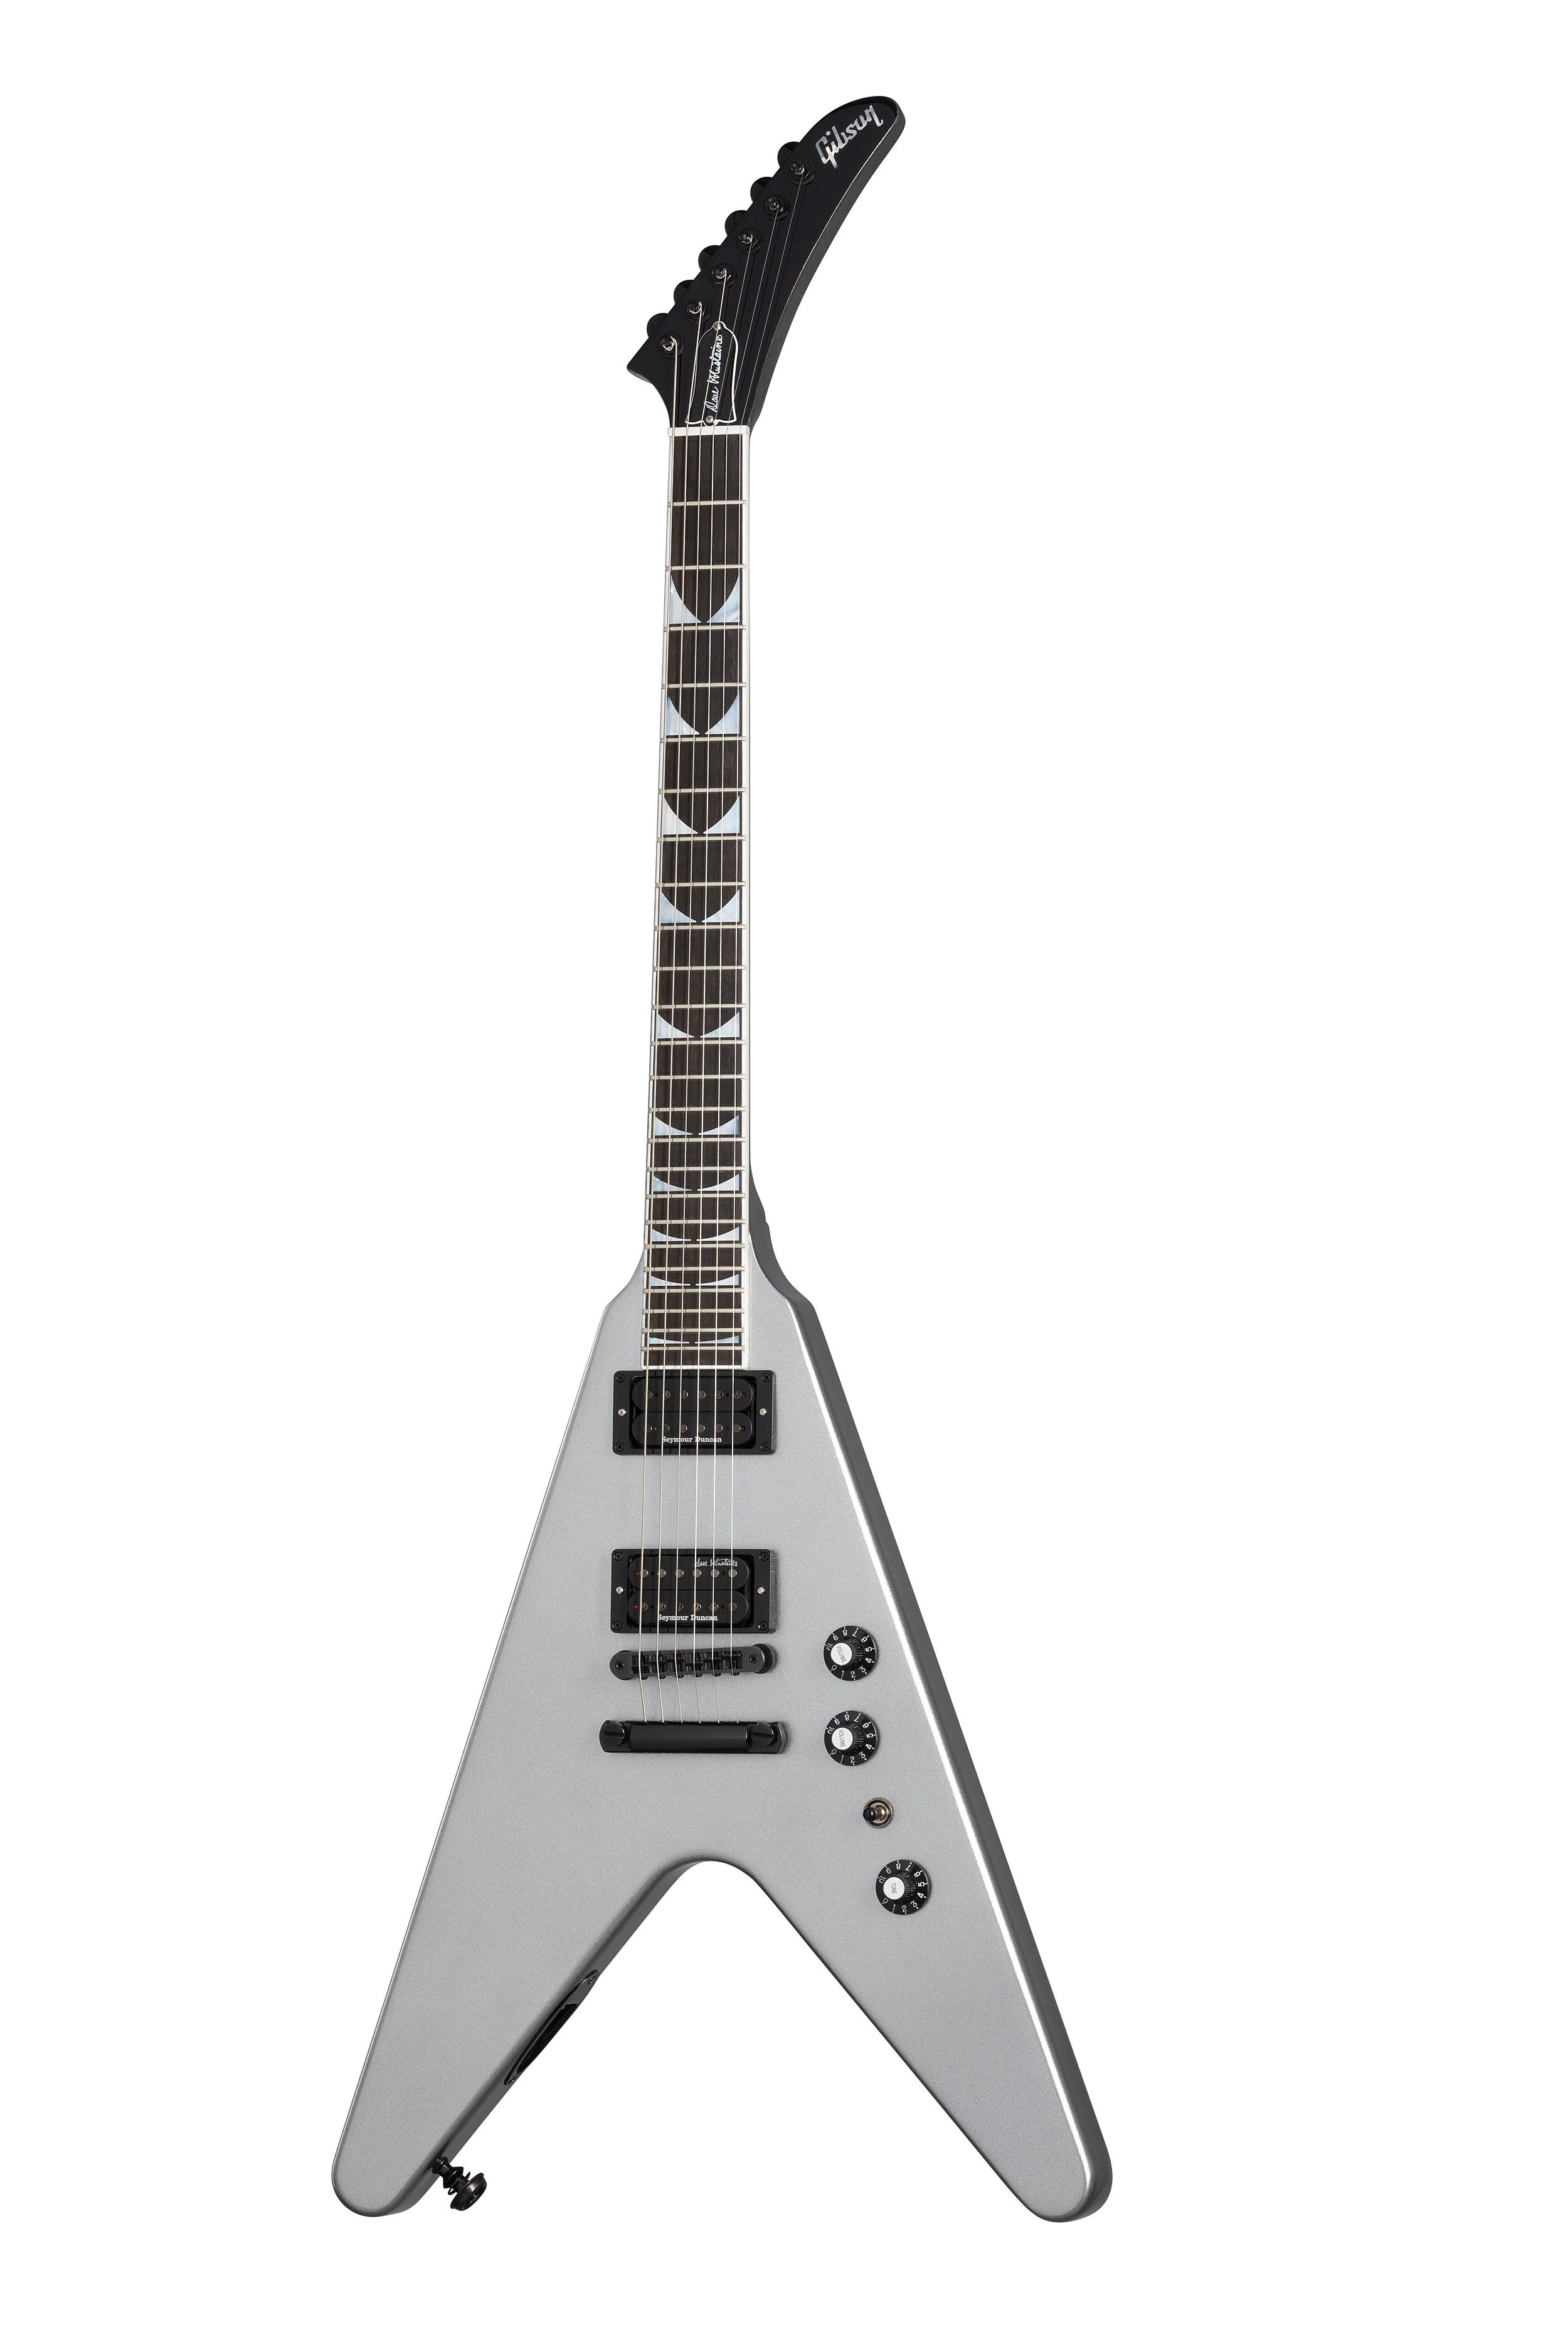 Gibson Releases Its First Dave Mustaine Signature Model Guitar